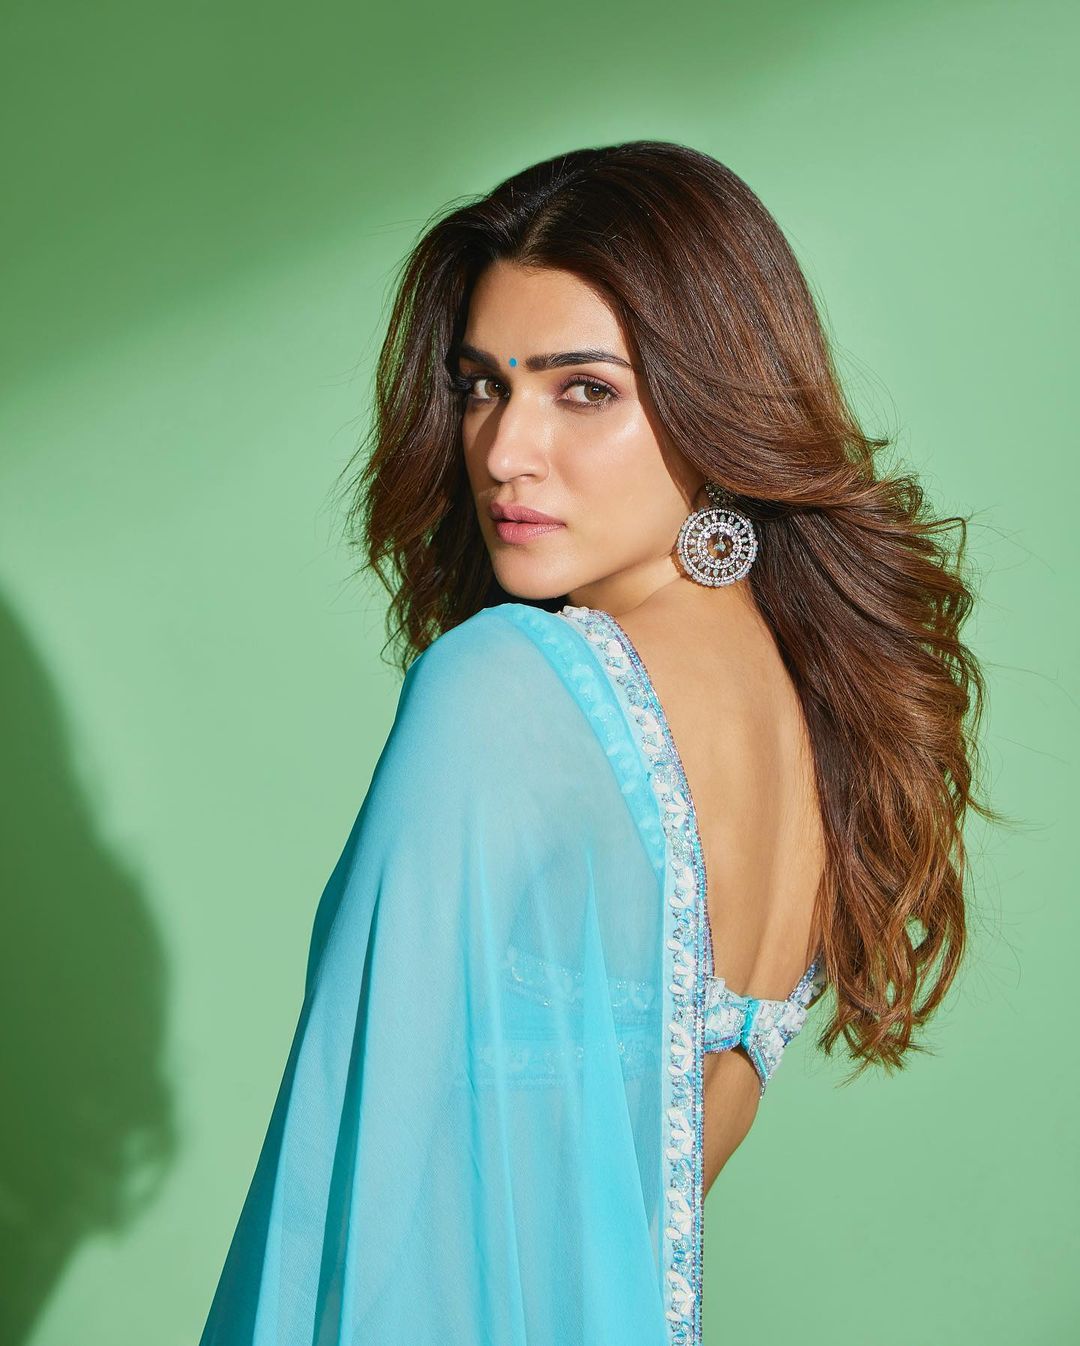 Kriti Sanon wearing a beautiful blue Georgette saree with intricate embroidery and jewelry for Bhediya Launch